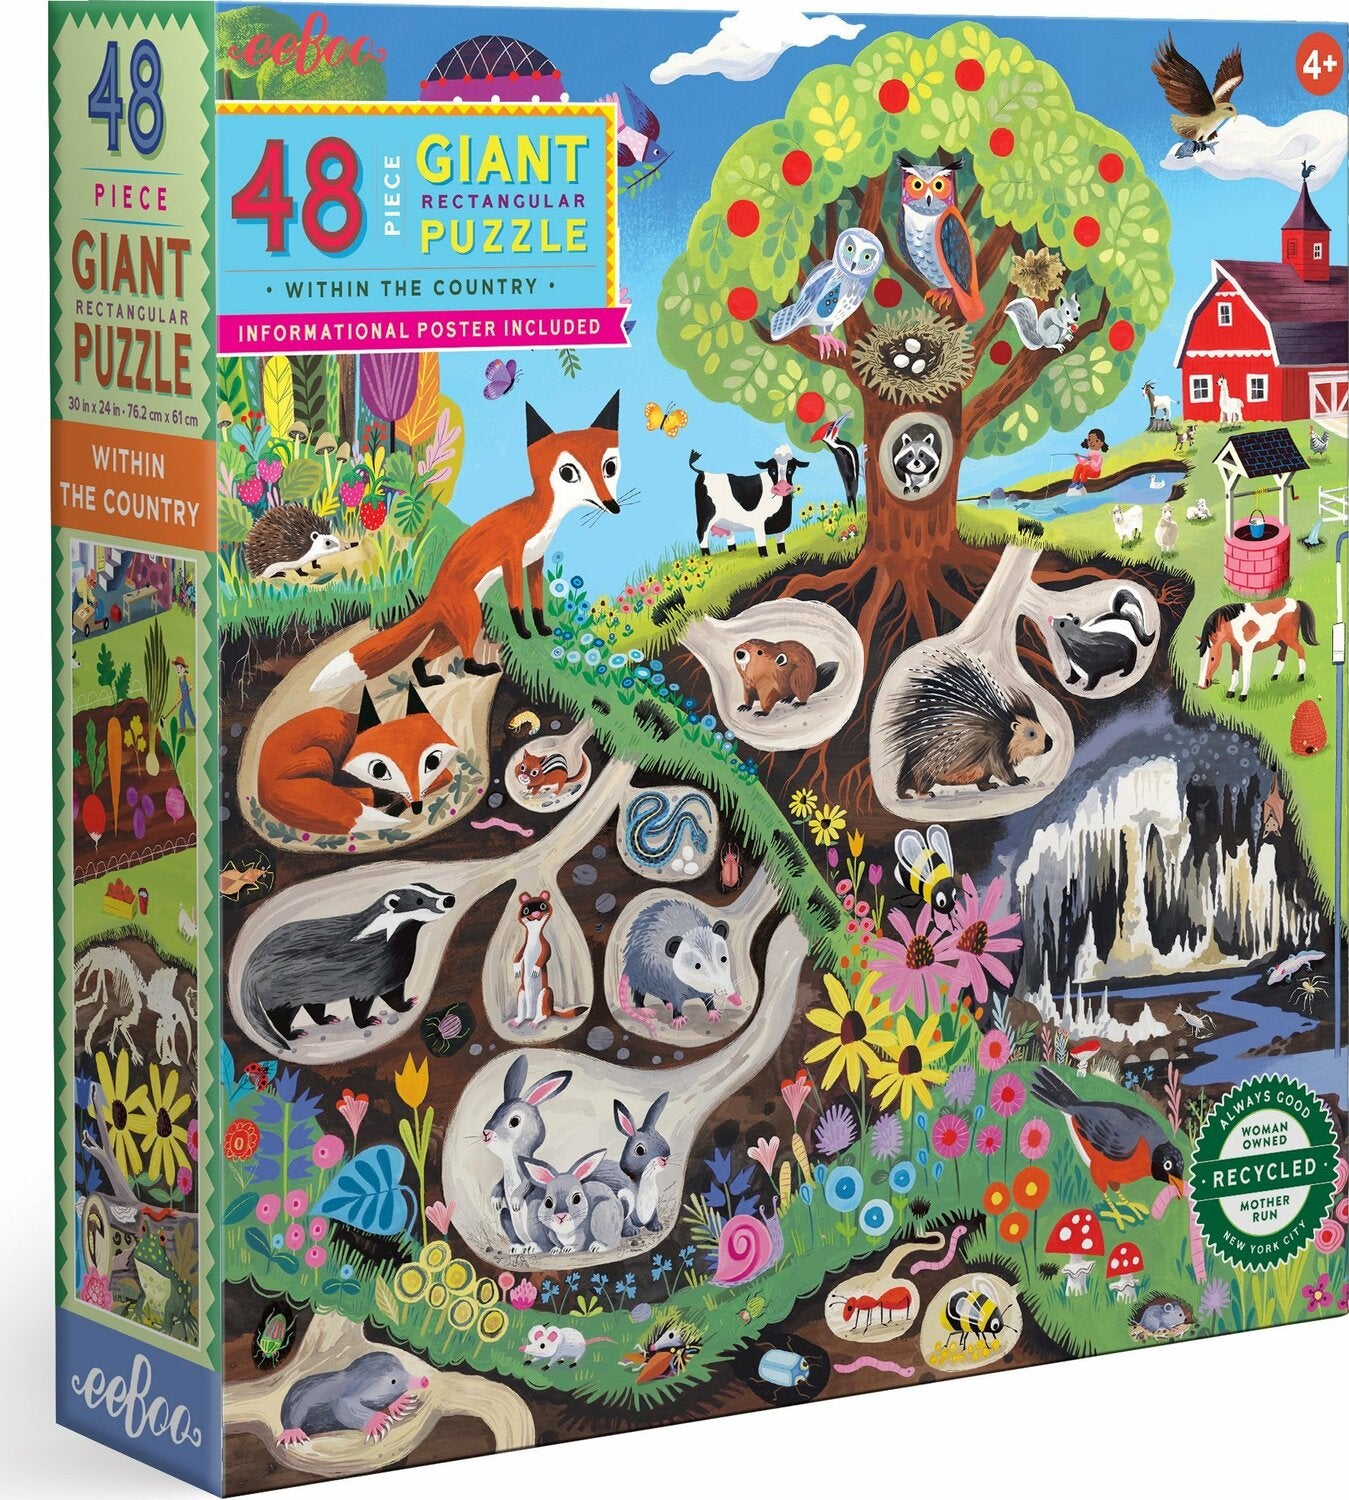 Within the Country 48pc Giant